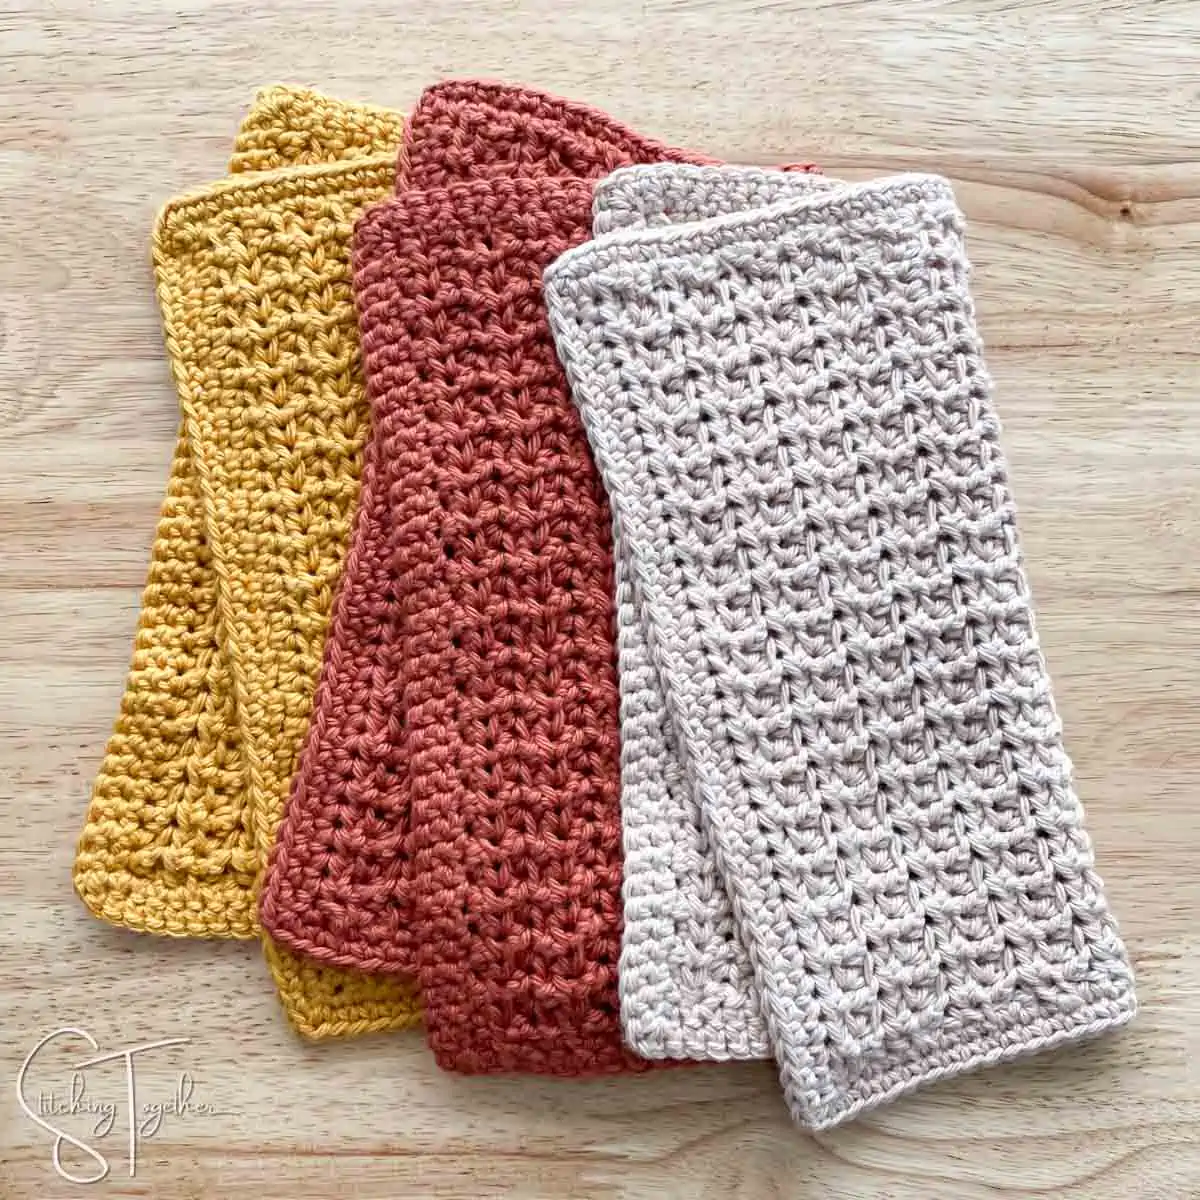 3 crochet washcloths folded in half laying somewhat stacked on each other